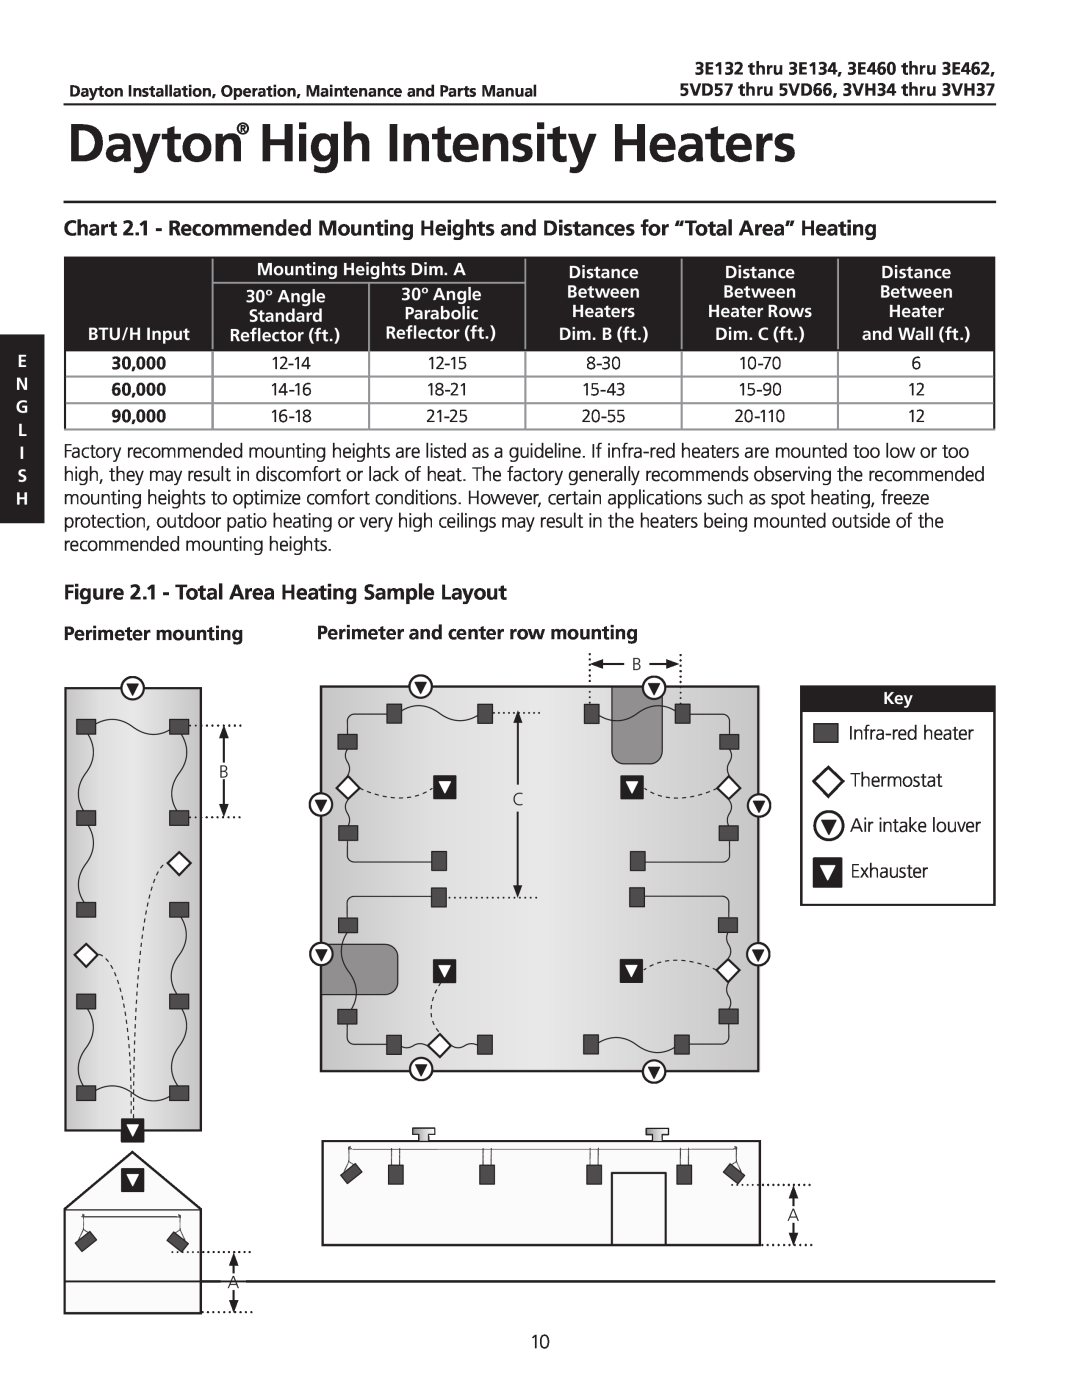 Dayton 3.00E+134 1 - Total Area Heating Sample Layout, Perimeter mounting, Perimeter and center row mounting, 30,000, 8-30 